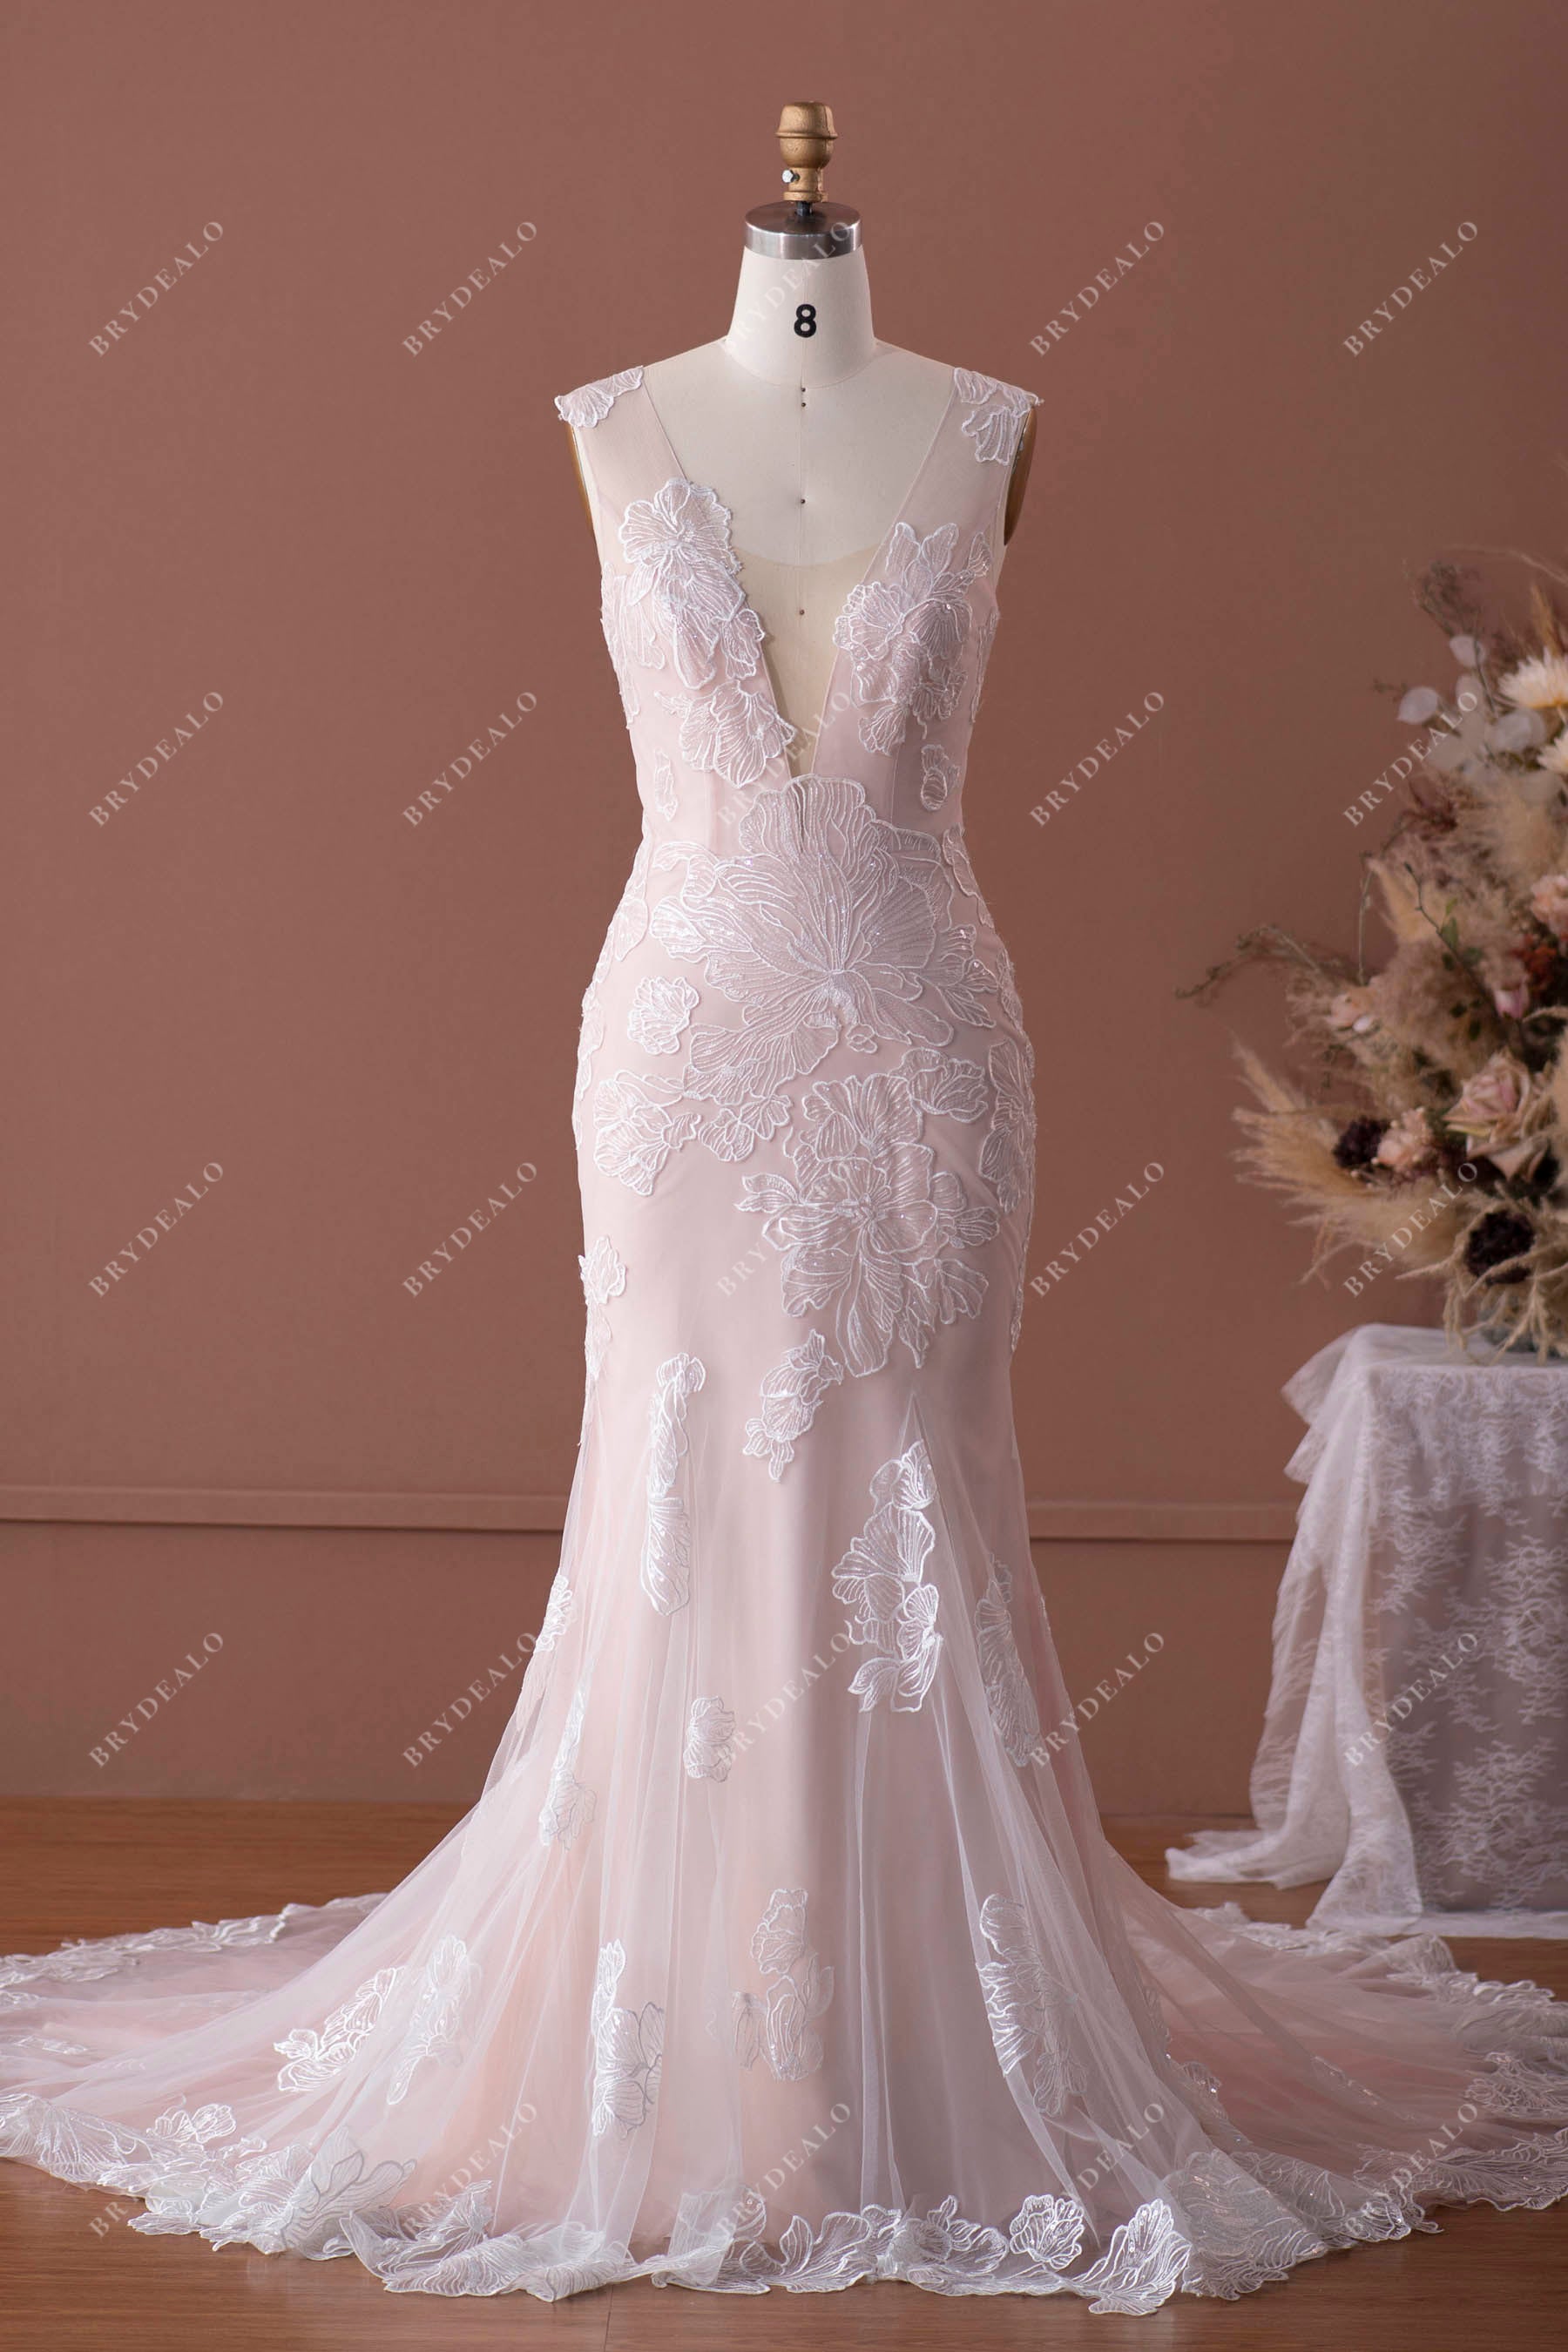 Dusty Rose Lace Mermaid Bridal Gown